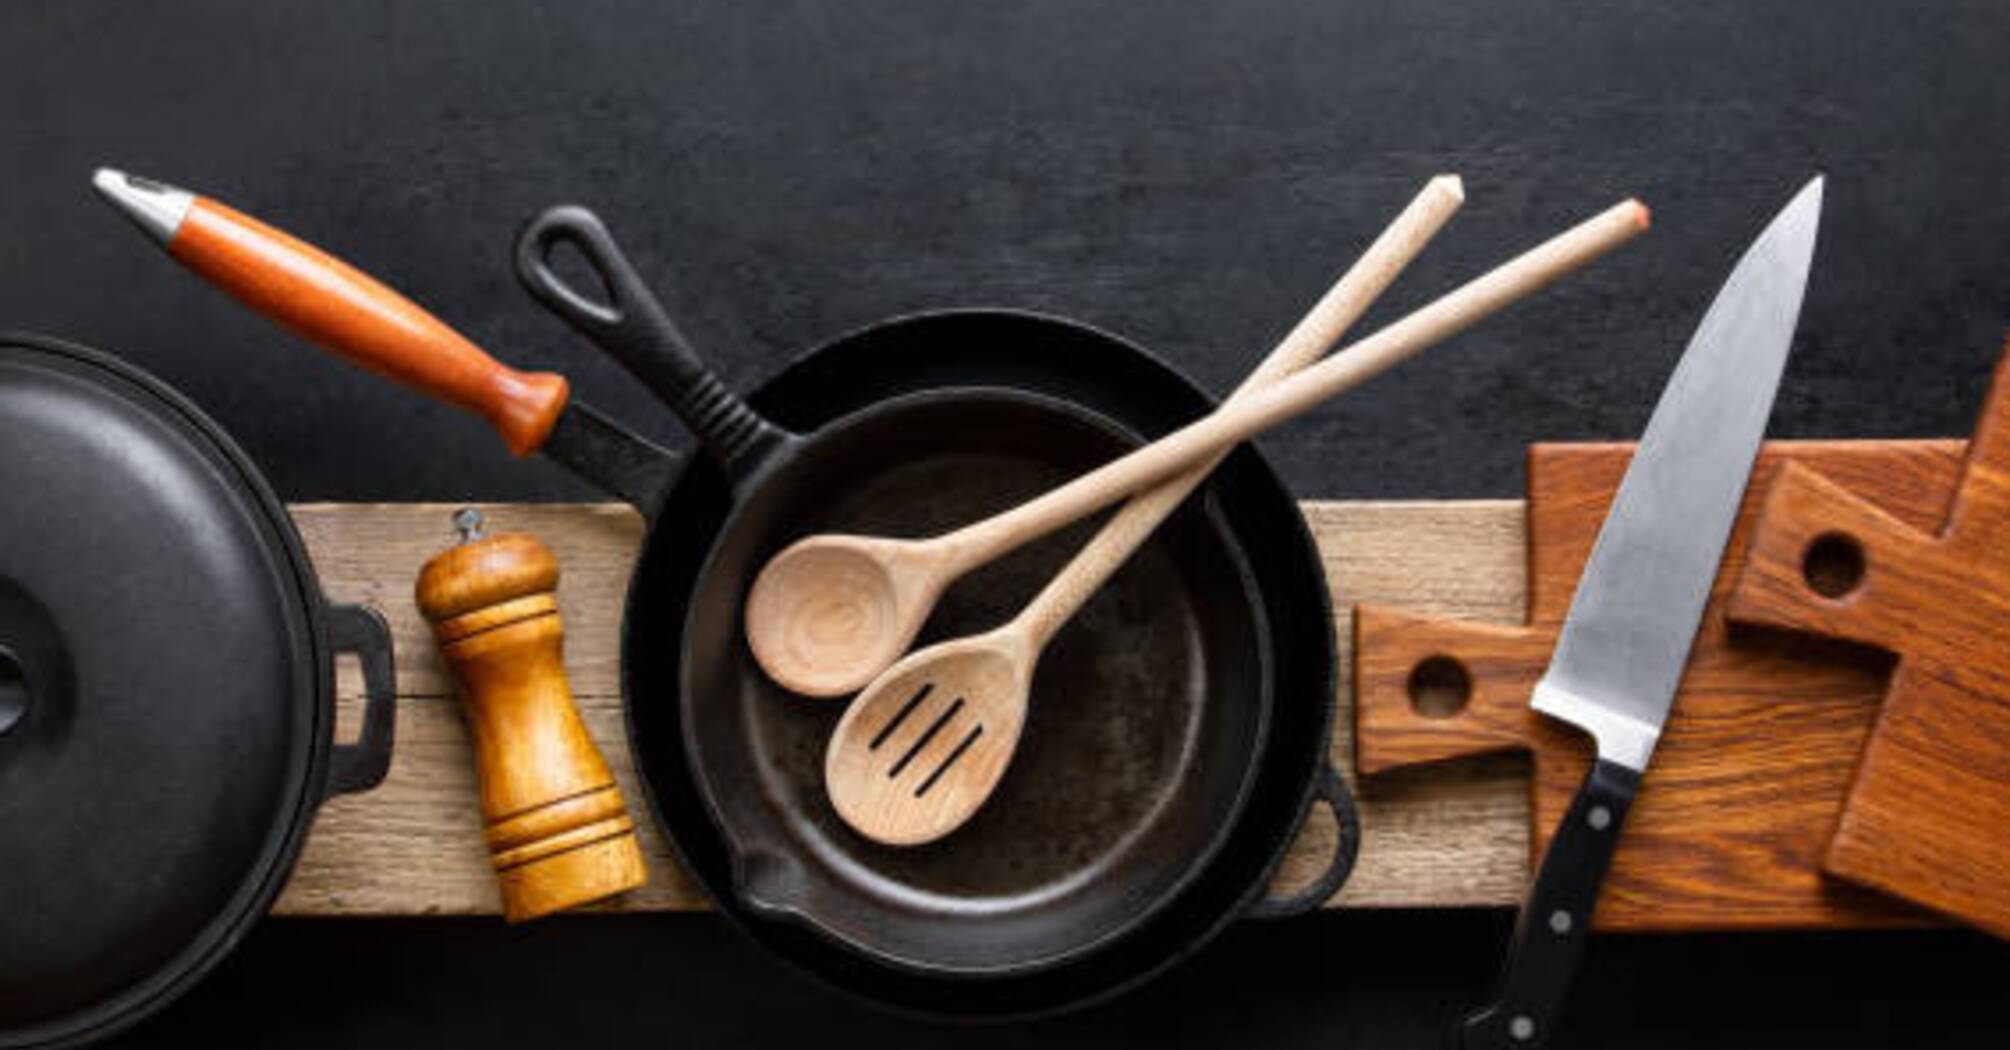 Advantages and disadvantages of cast iron cookware: What to consider when buying